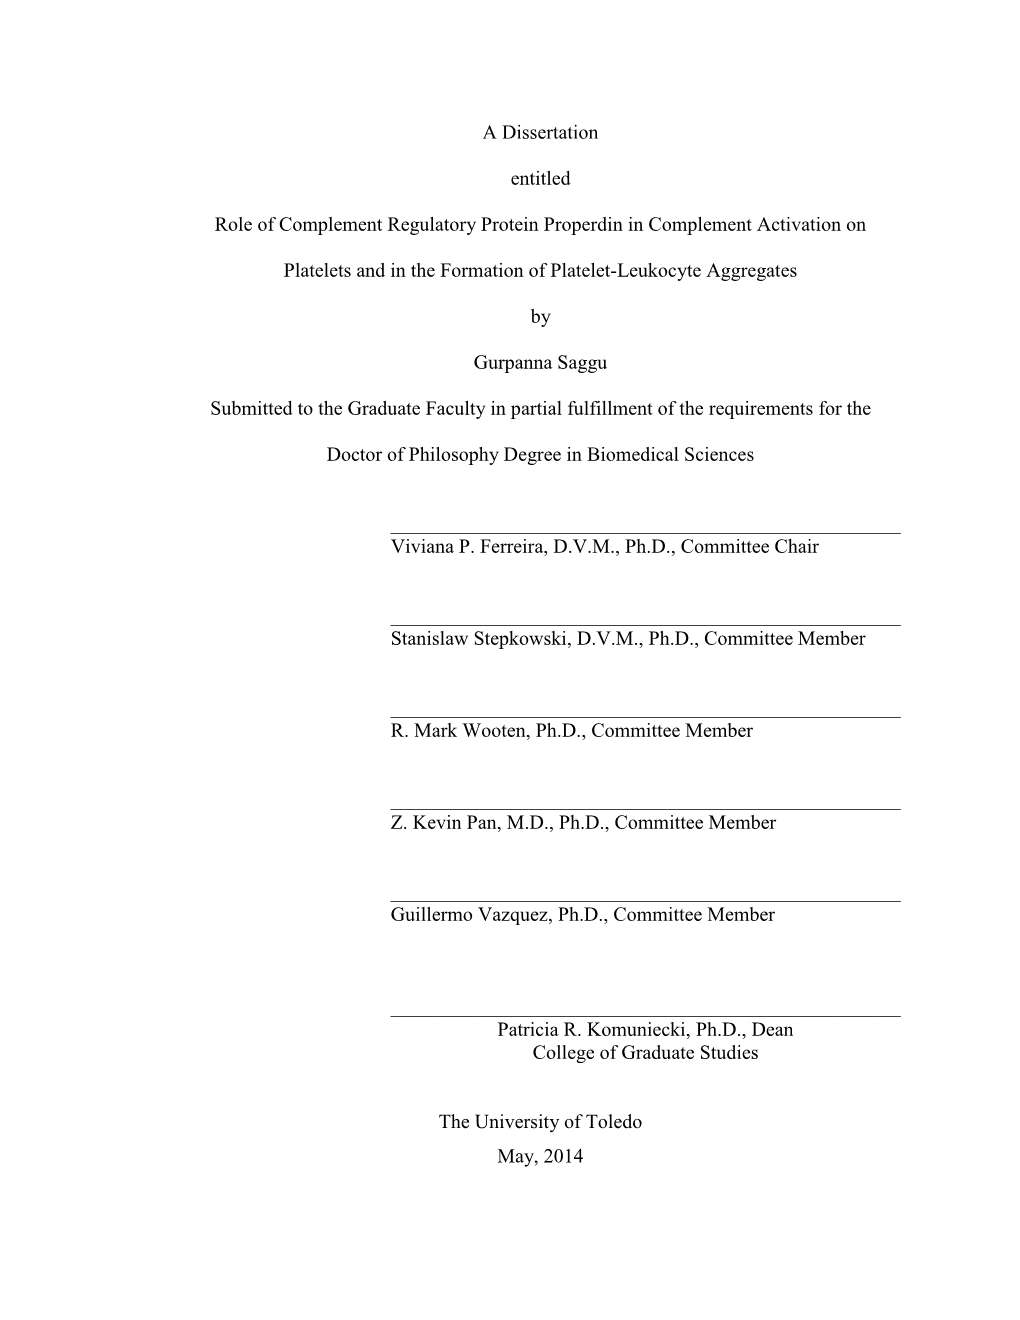 A Dissertation Entitled Role of Complement Regulatory Protein